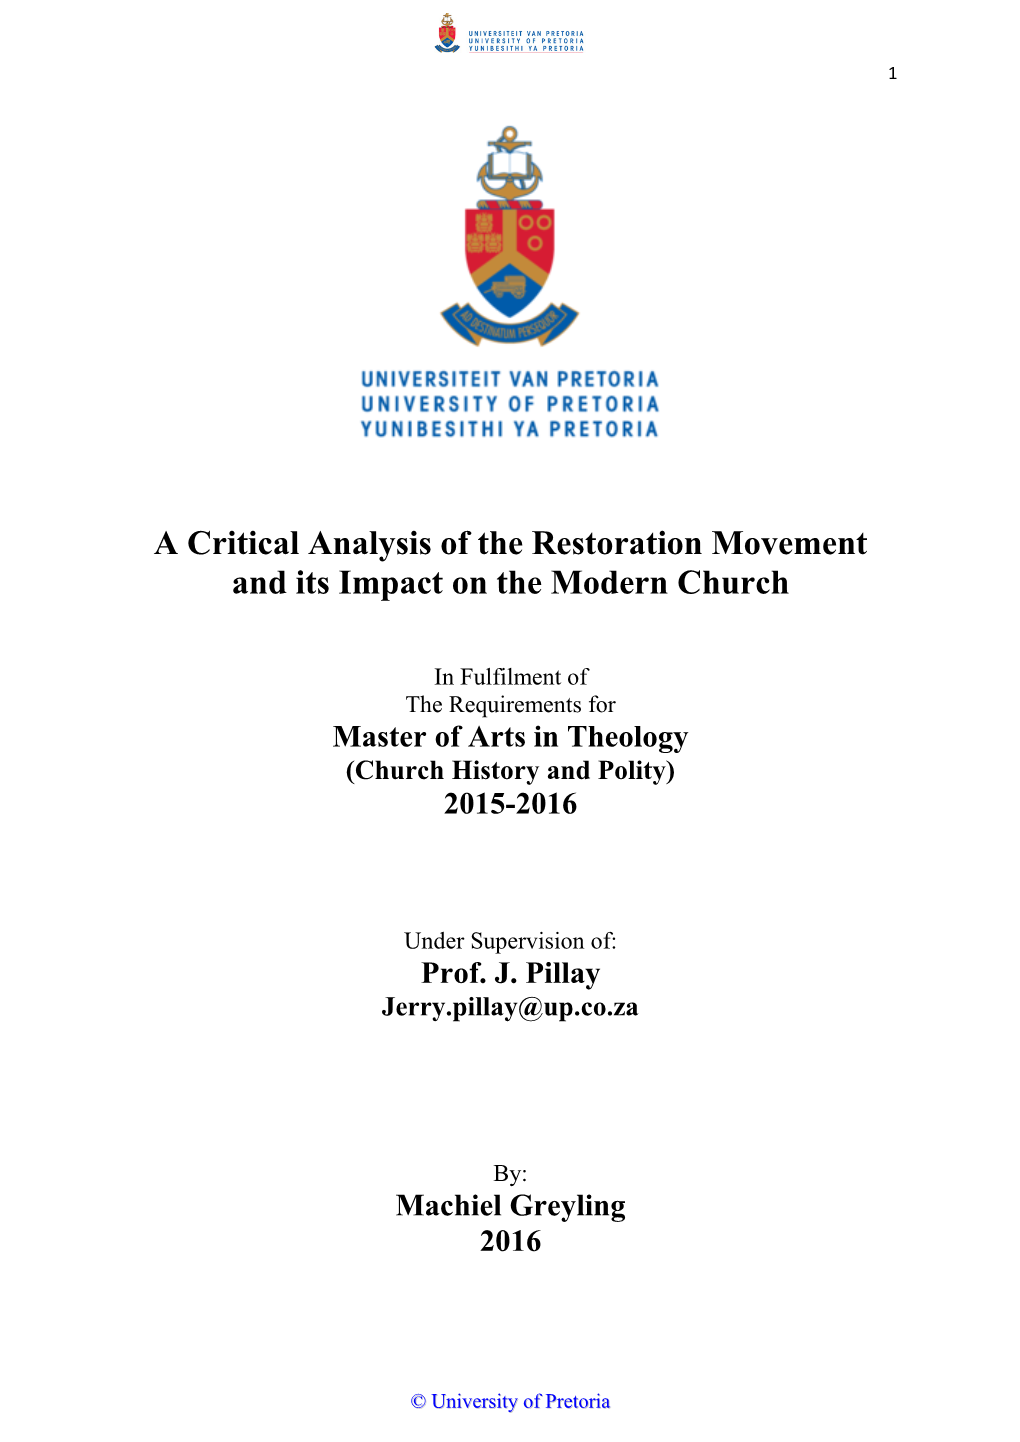 A Critical Analysis of the Restoration Movement and Its Impact on the Modern Church